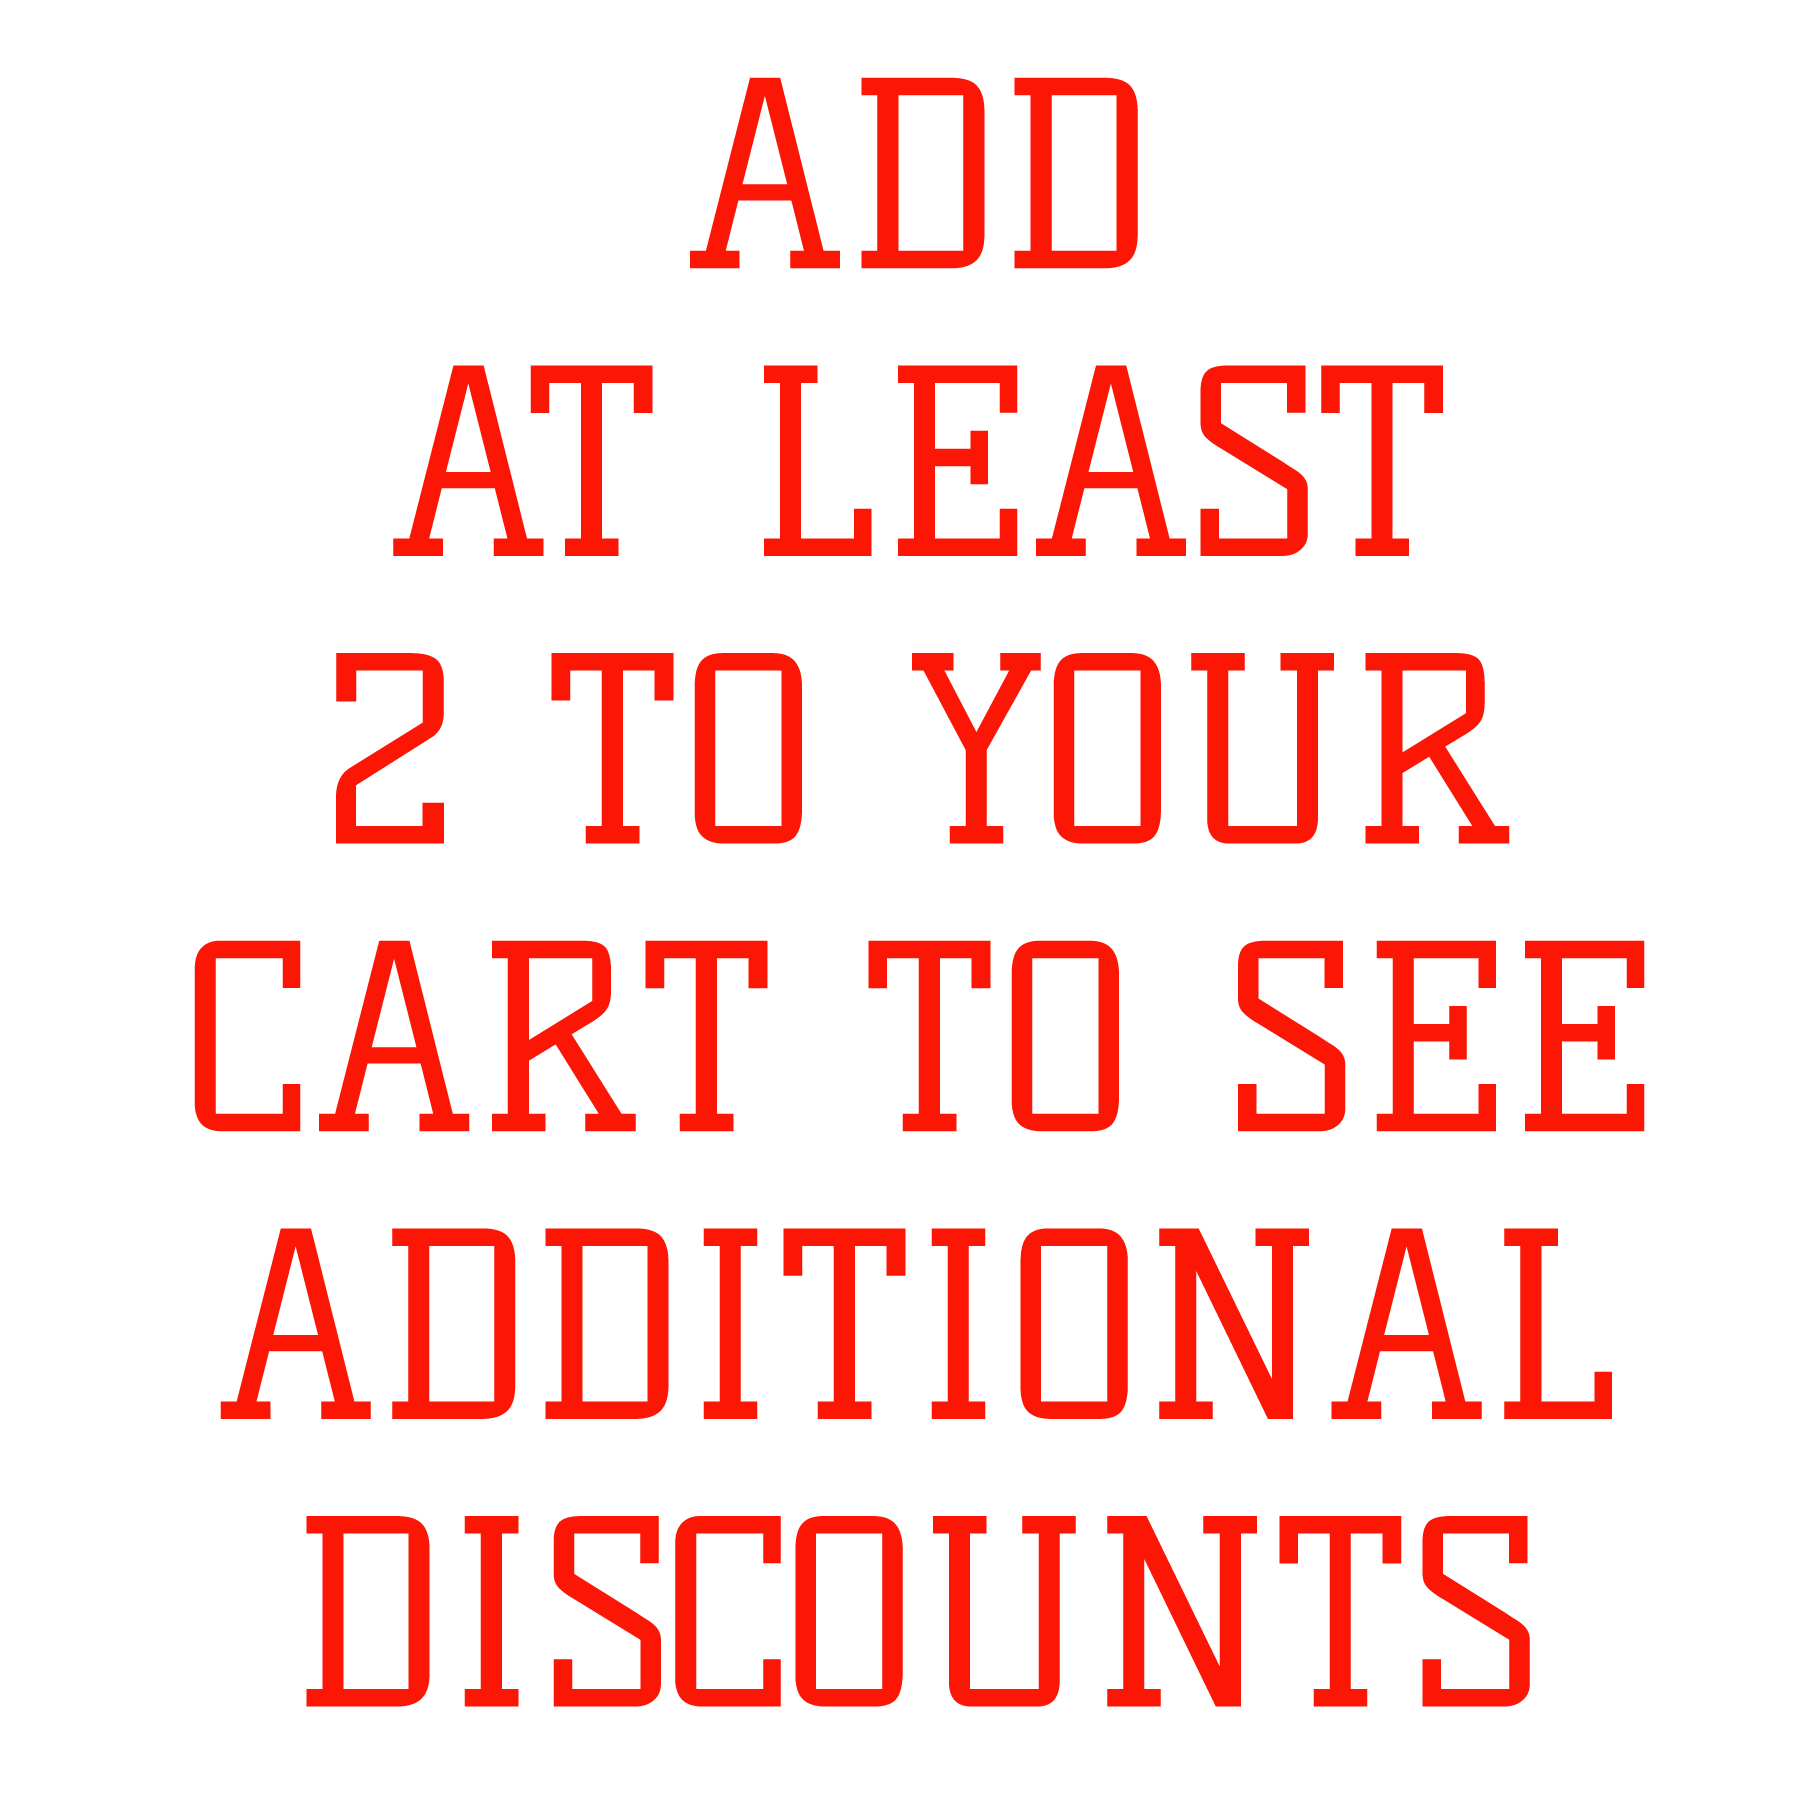 Add 2 to your cart to see discount